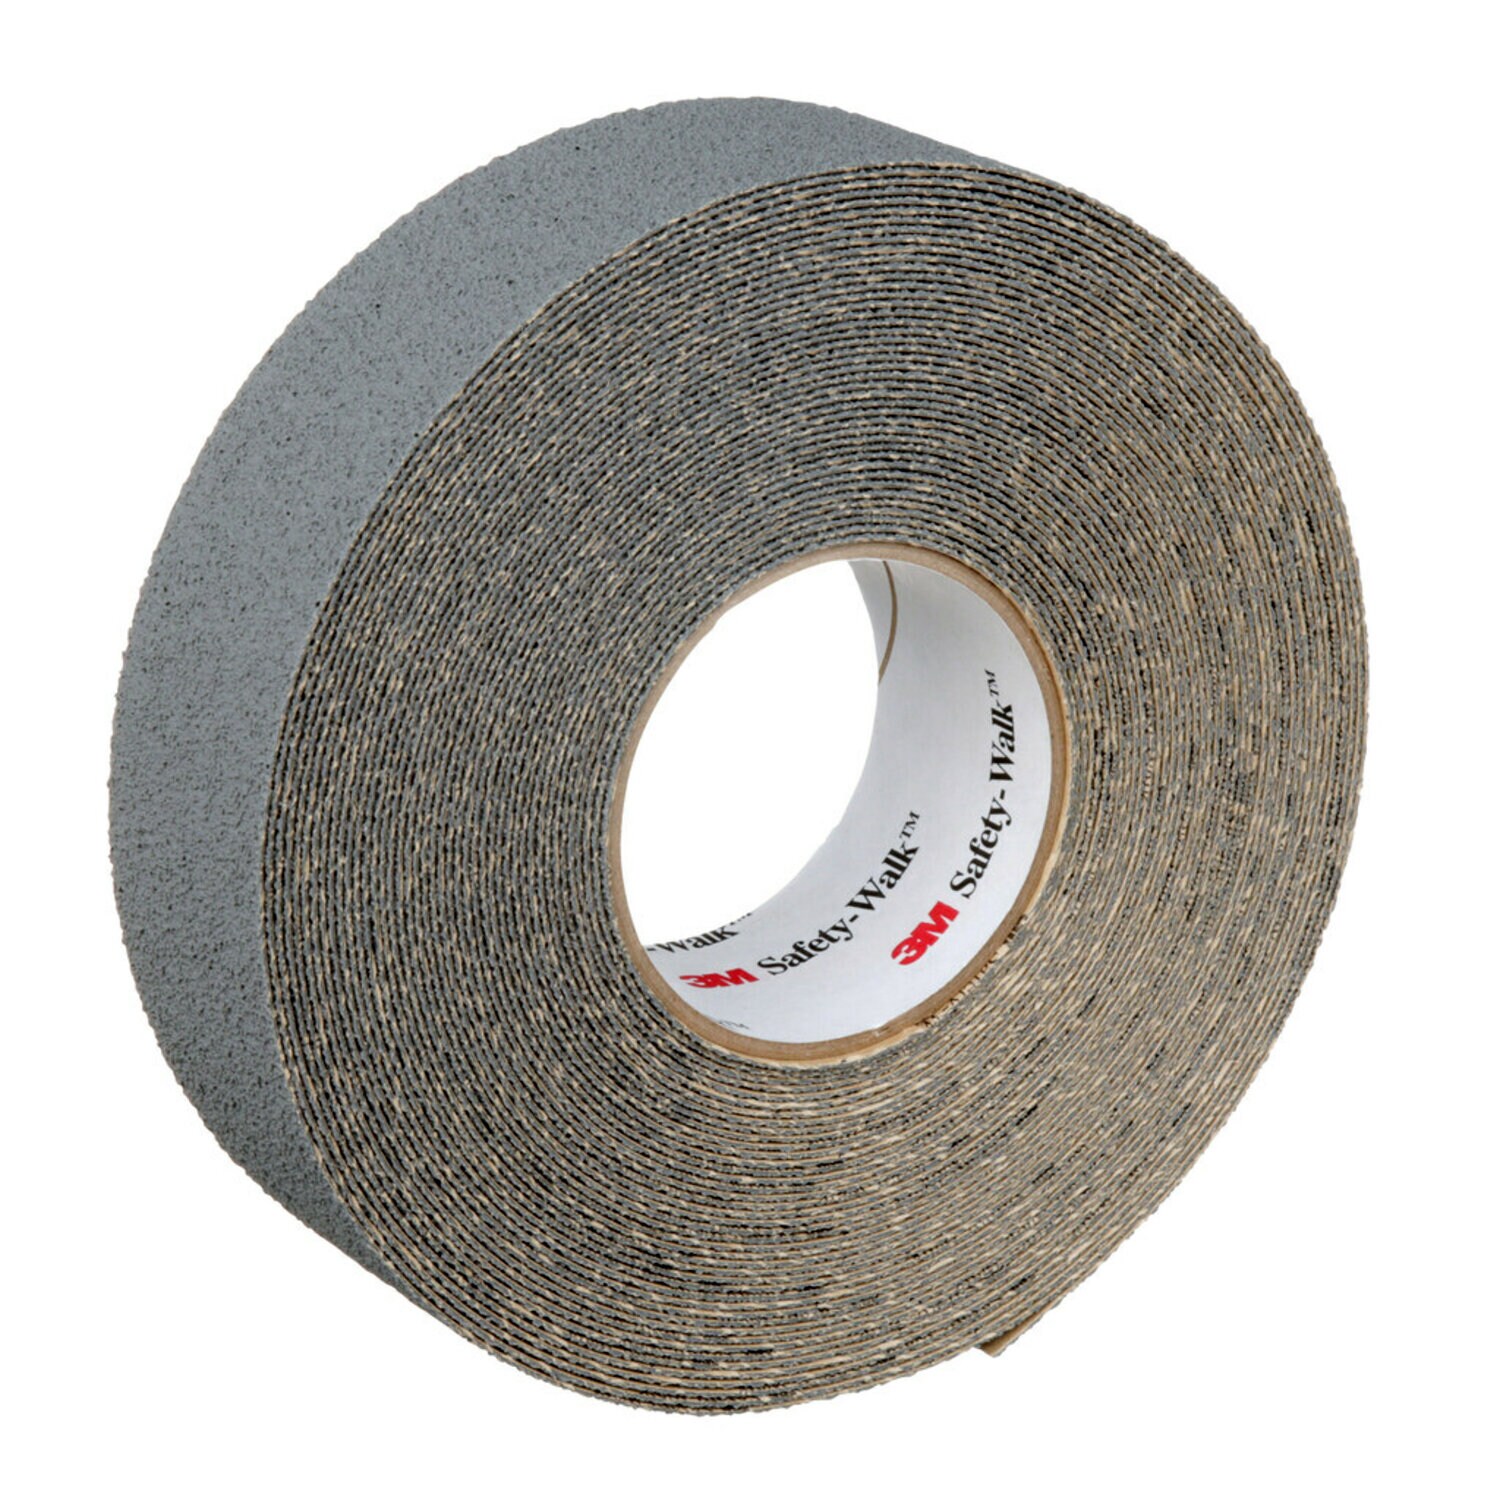 7000001997 - 3M Safety-Walk Slip-Resistant Medium Resilient Tapes & Treads 370,
Gray, 2 in x 60 ft, Roll, 2/Case